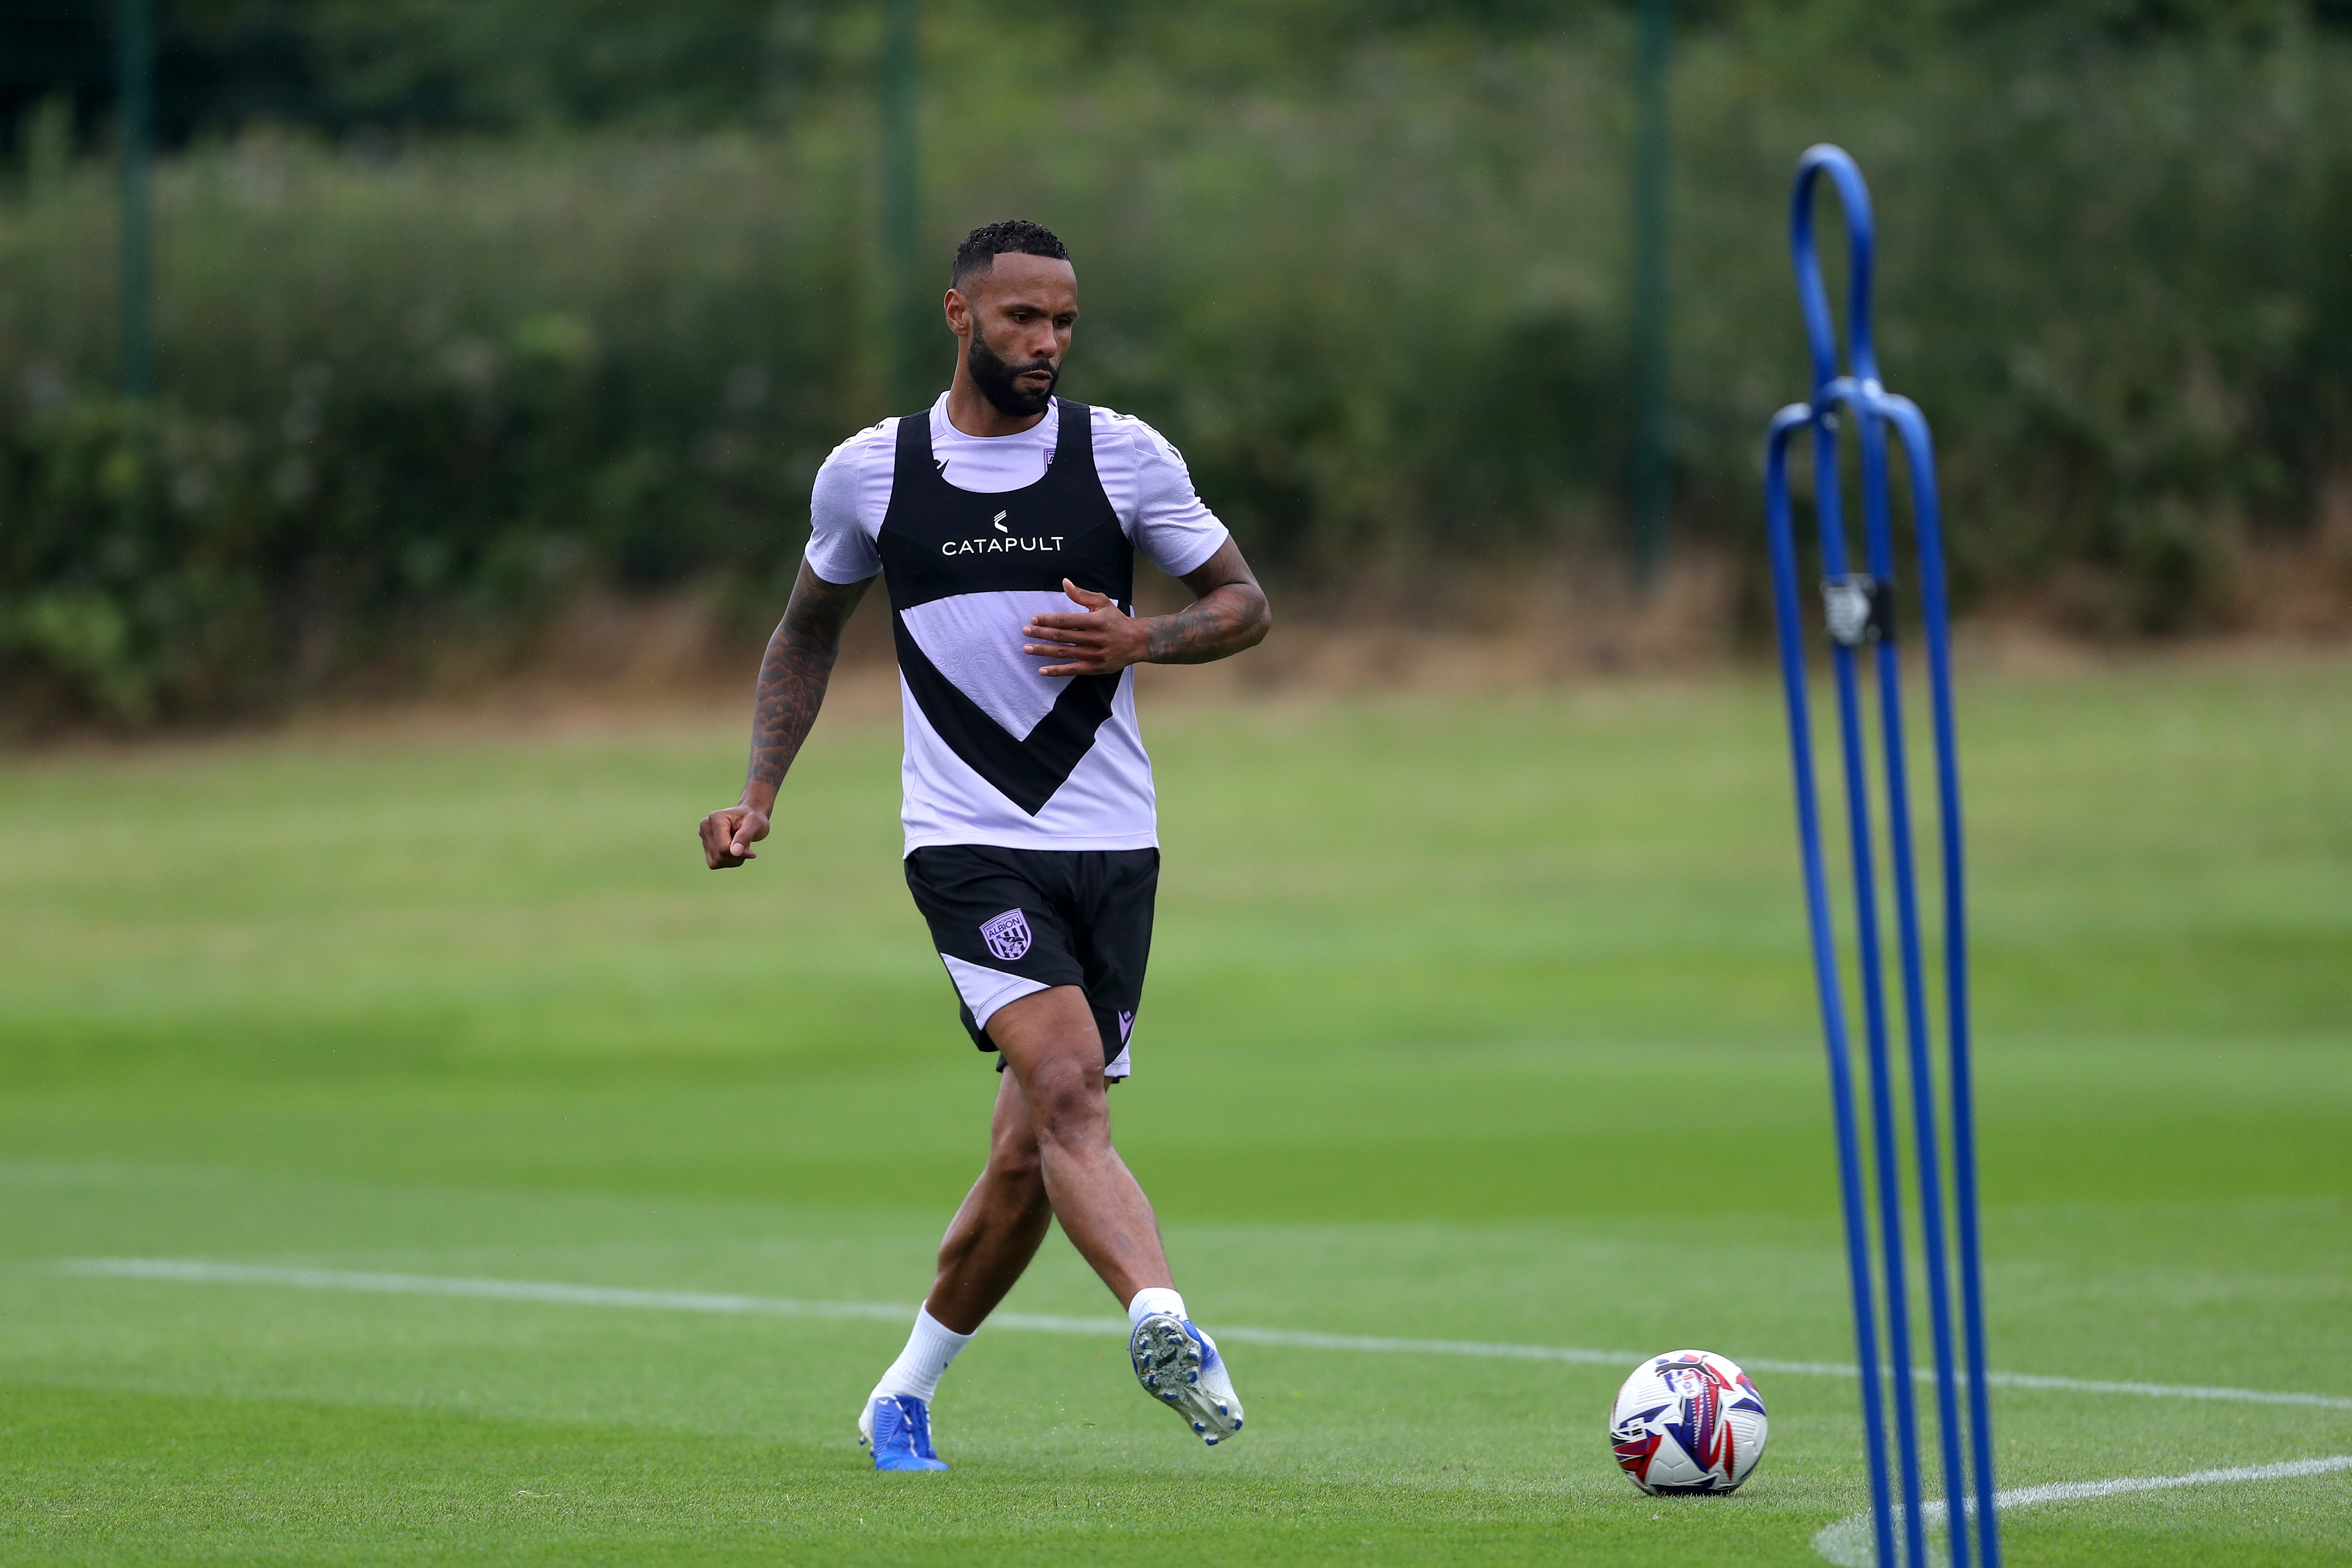 Kyle Bartley passing the ball during a training session